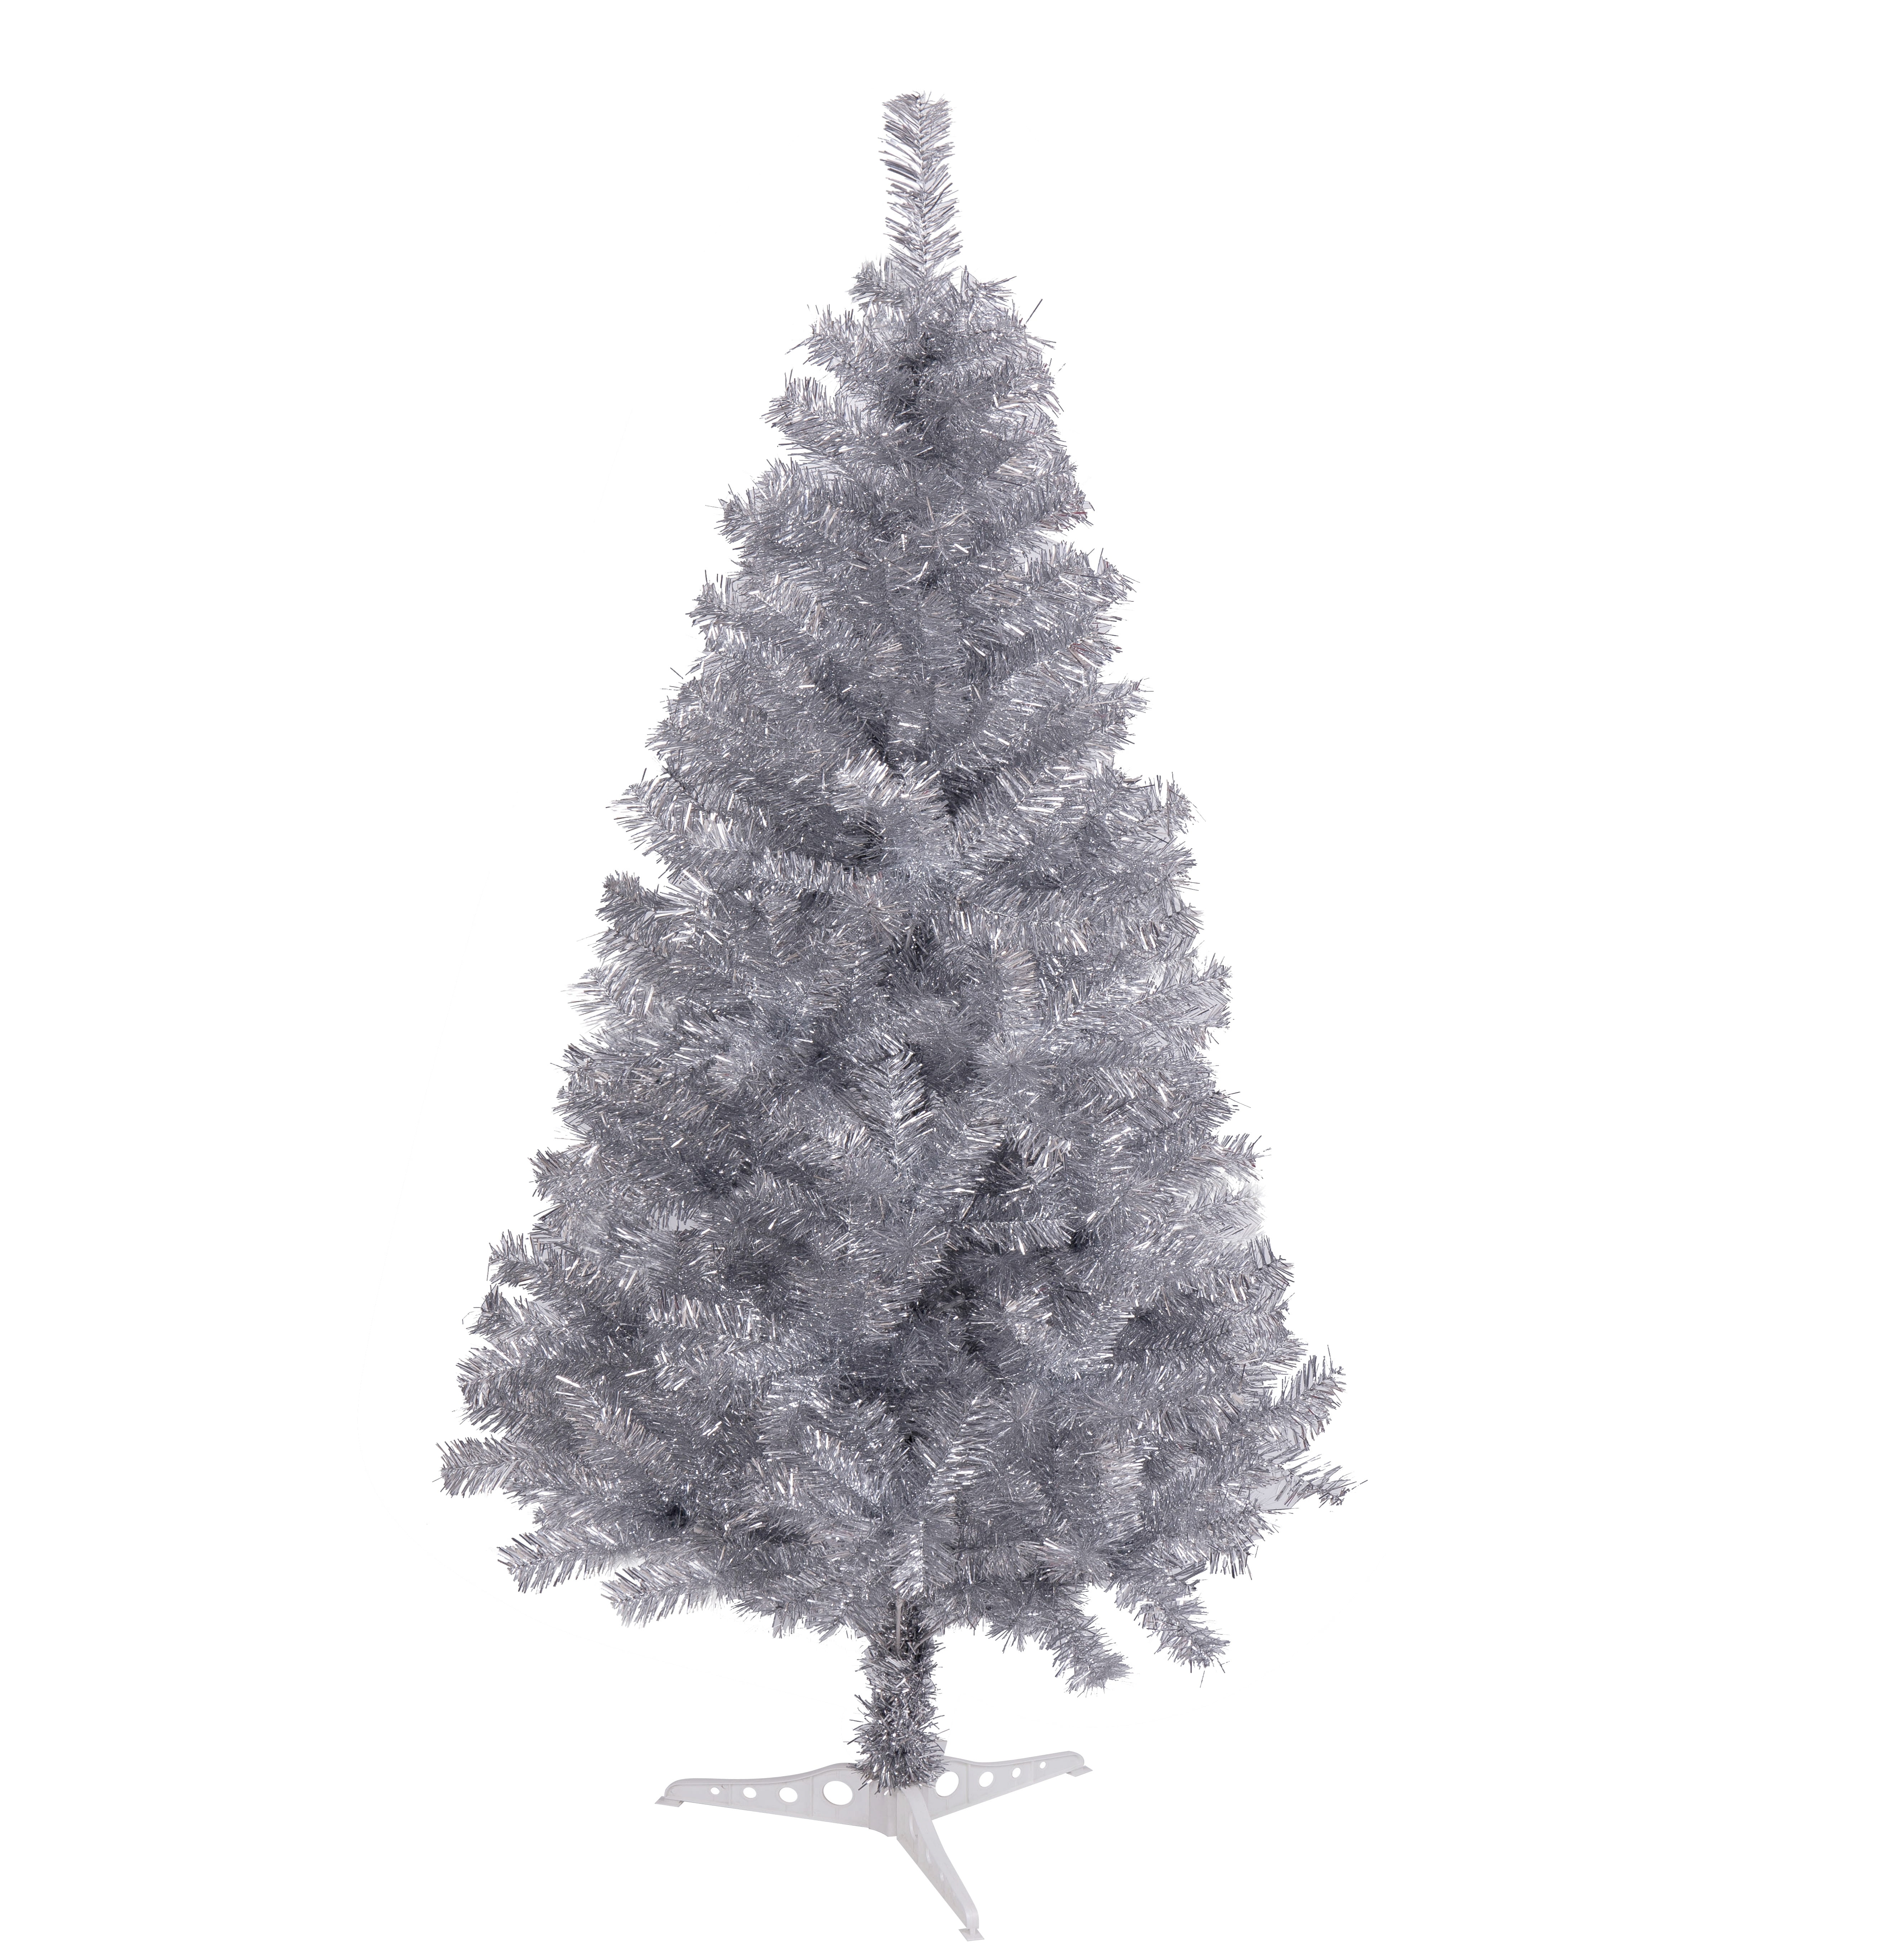 Fawyn Folding Artificial Christmas Tree for Home Seasonal Decoration Silver 6 ft Tinsel Christmas Tree with 450 Branch Tips for Xmas Party Indoor Outdoor